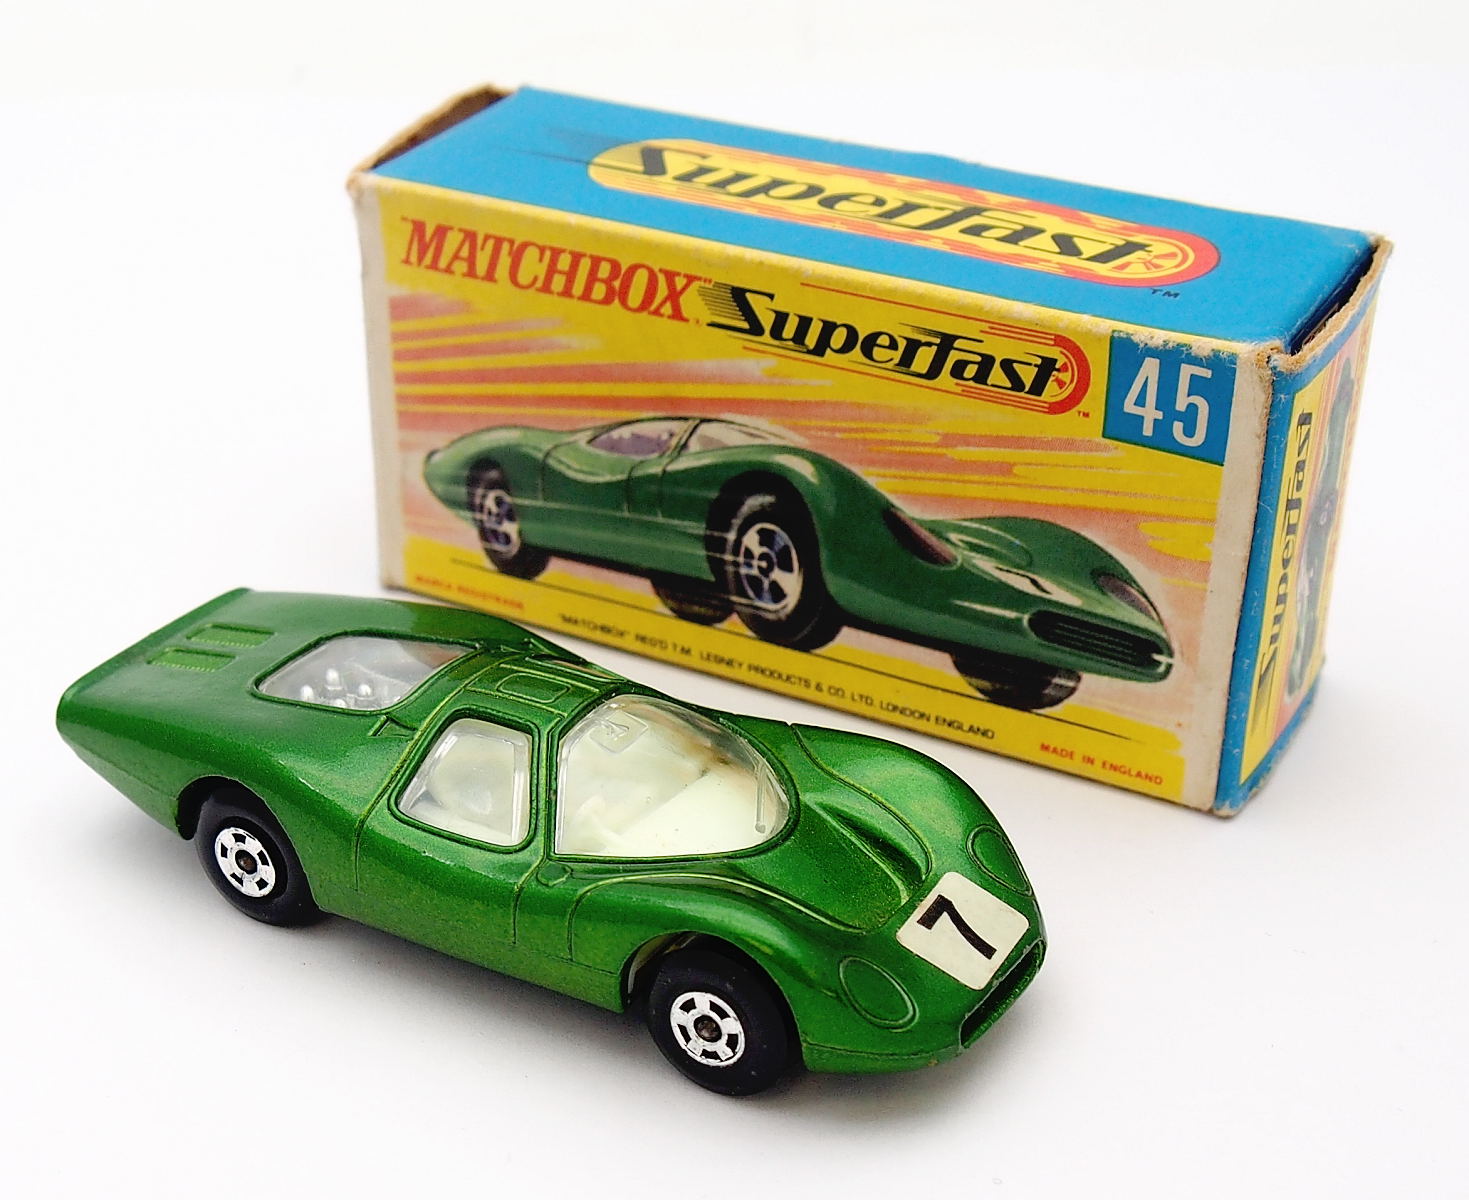 Matchbox Superfast No.45 Ford Group 6 Mint & Boxed #9555